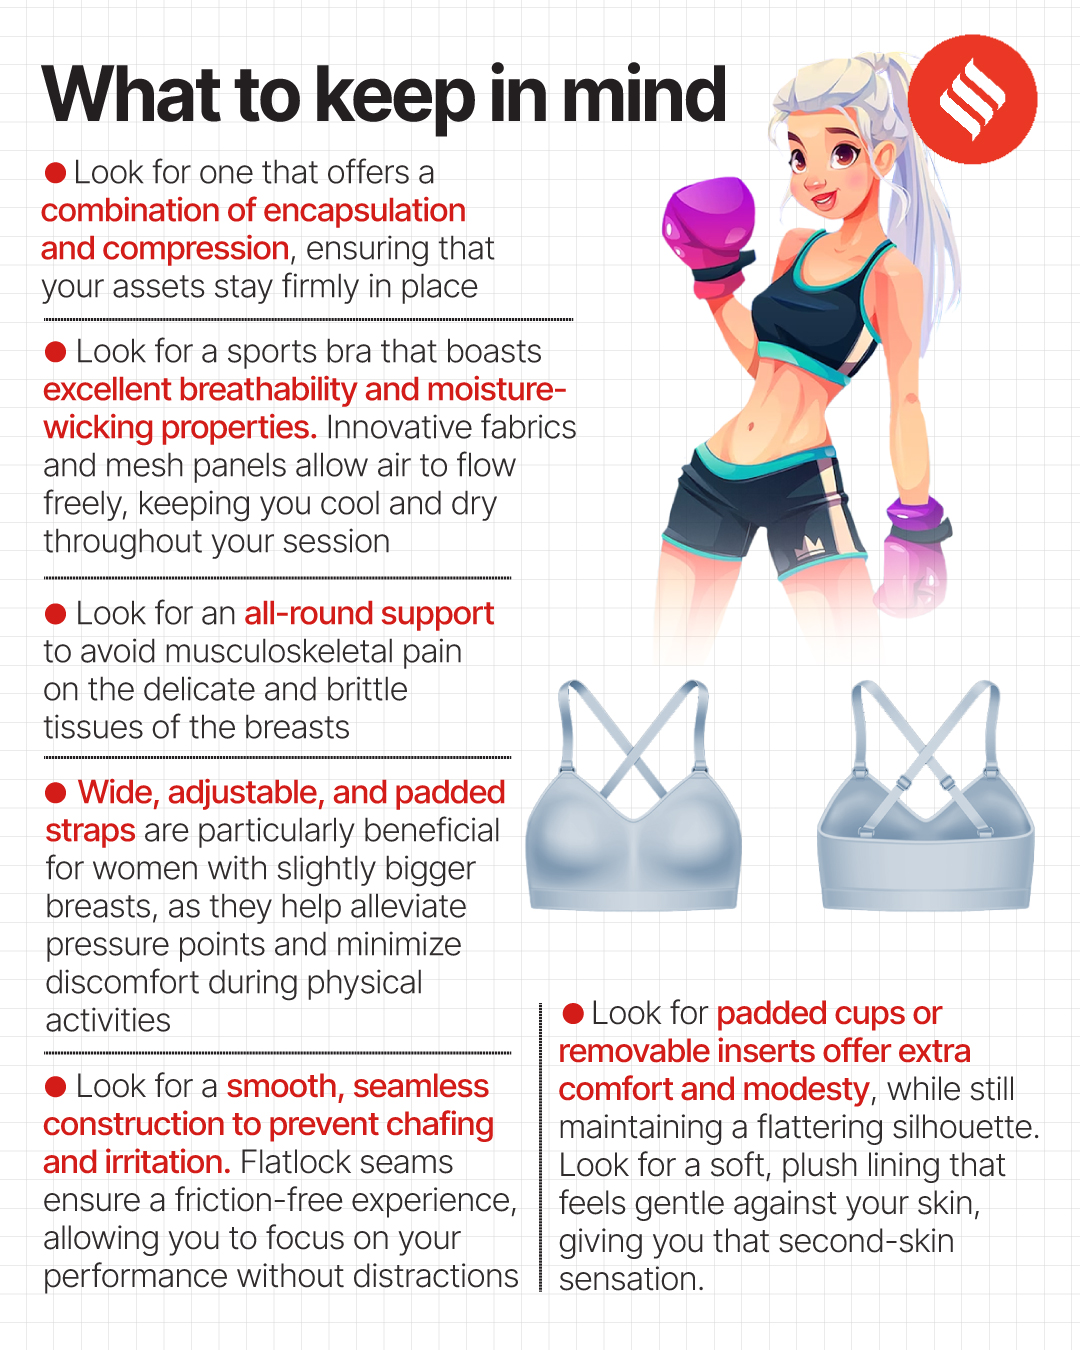 How can a sports bra better your gym routine? What are the